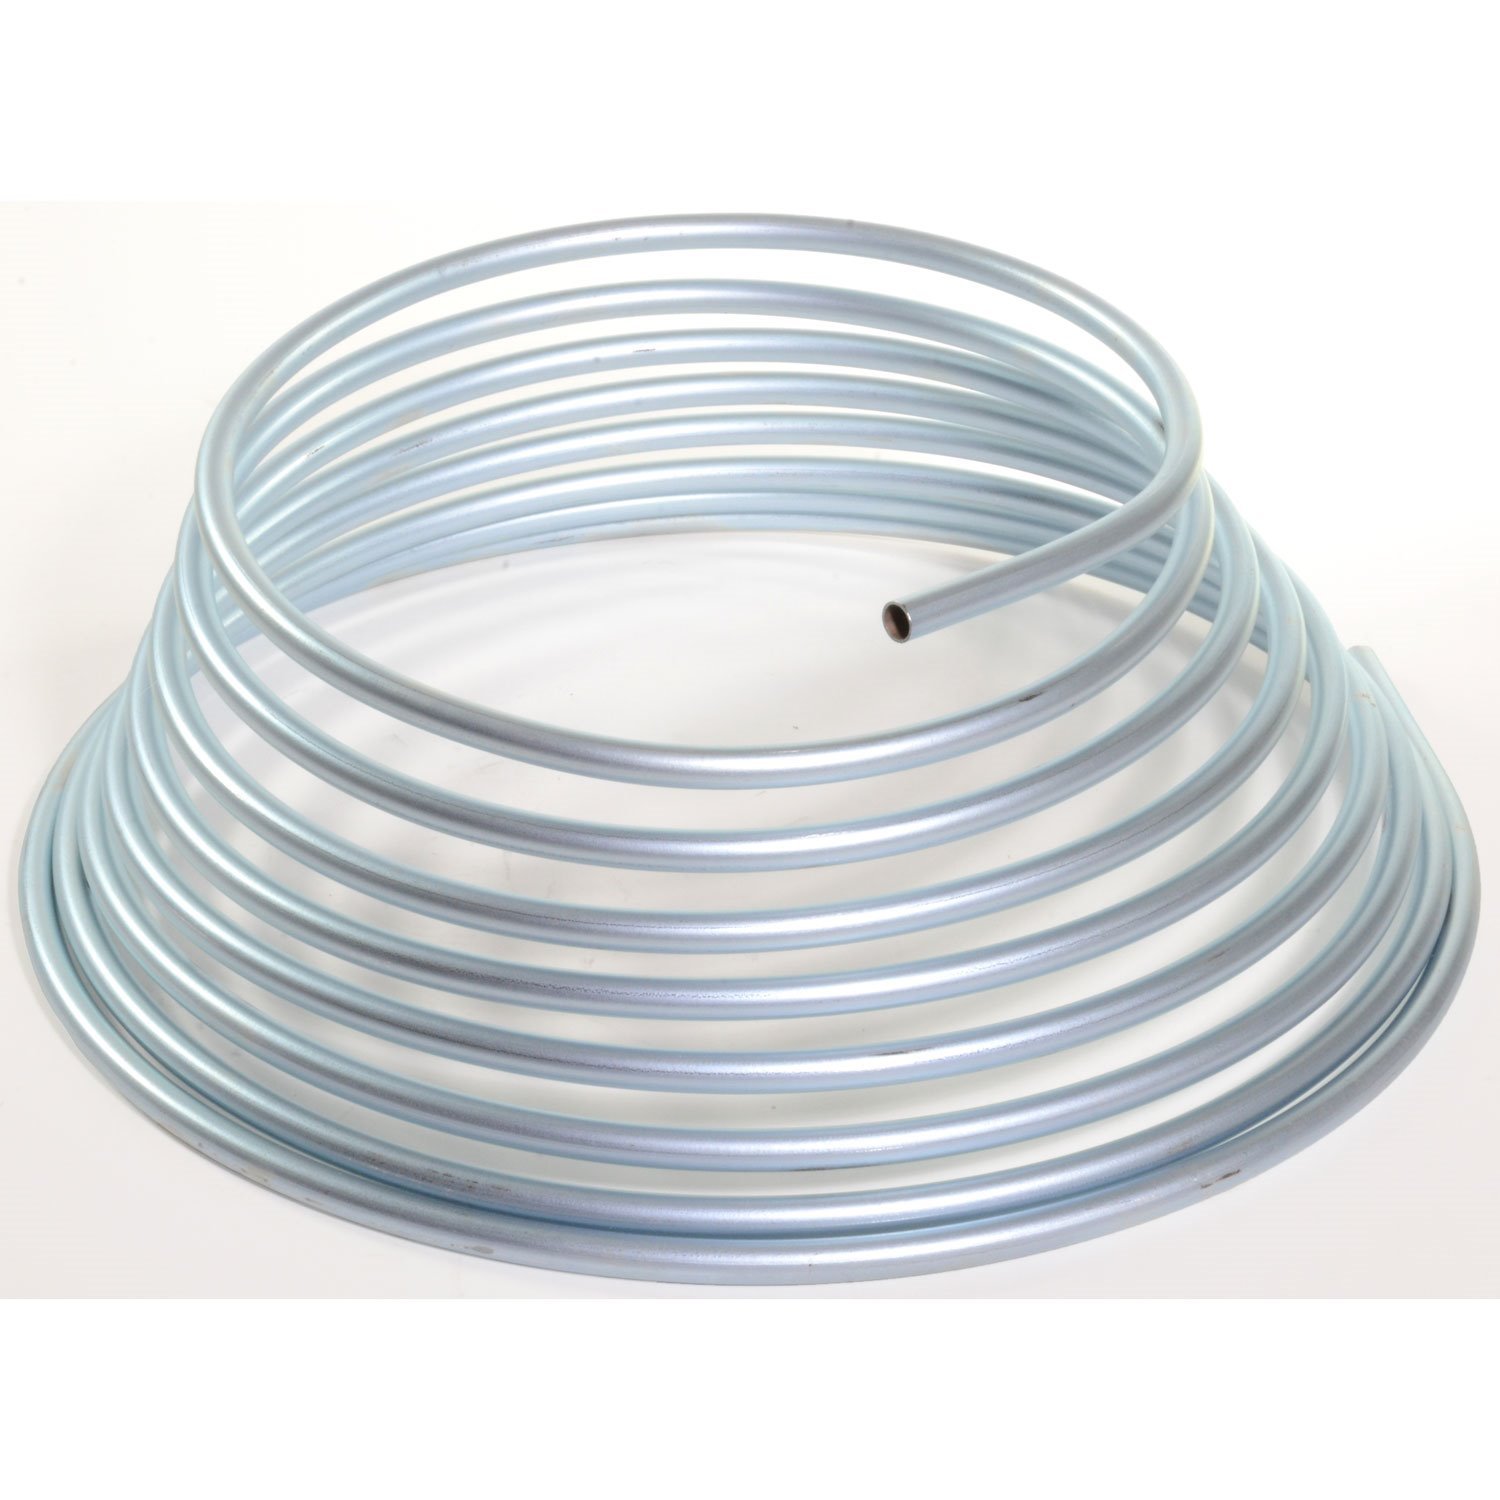 JEGS 63037 Zinc Fuel and Transmission Cooler Tubing 3/8 in. Diameter x 25 ft.